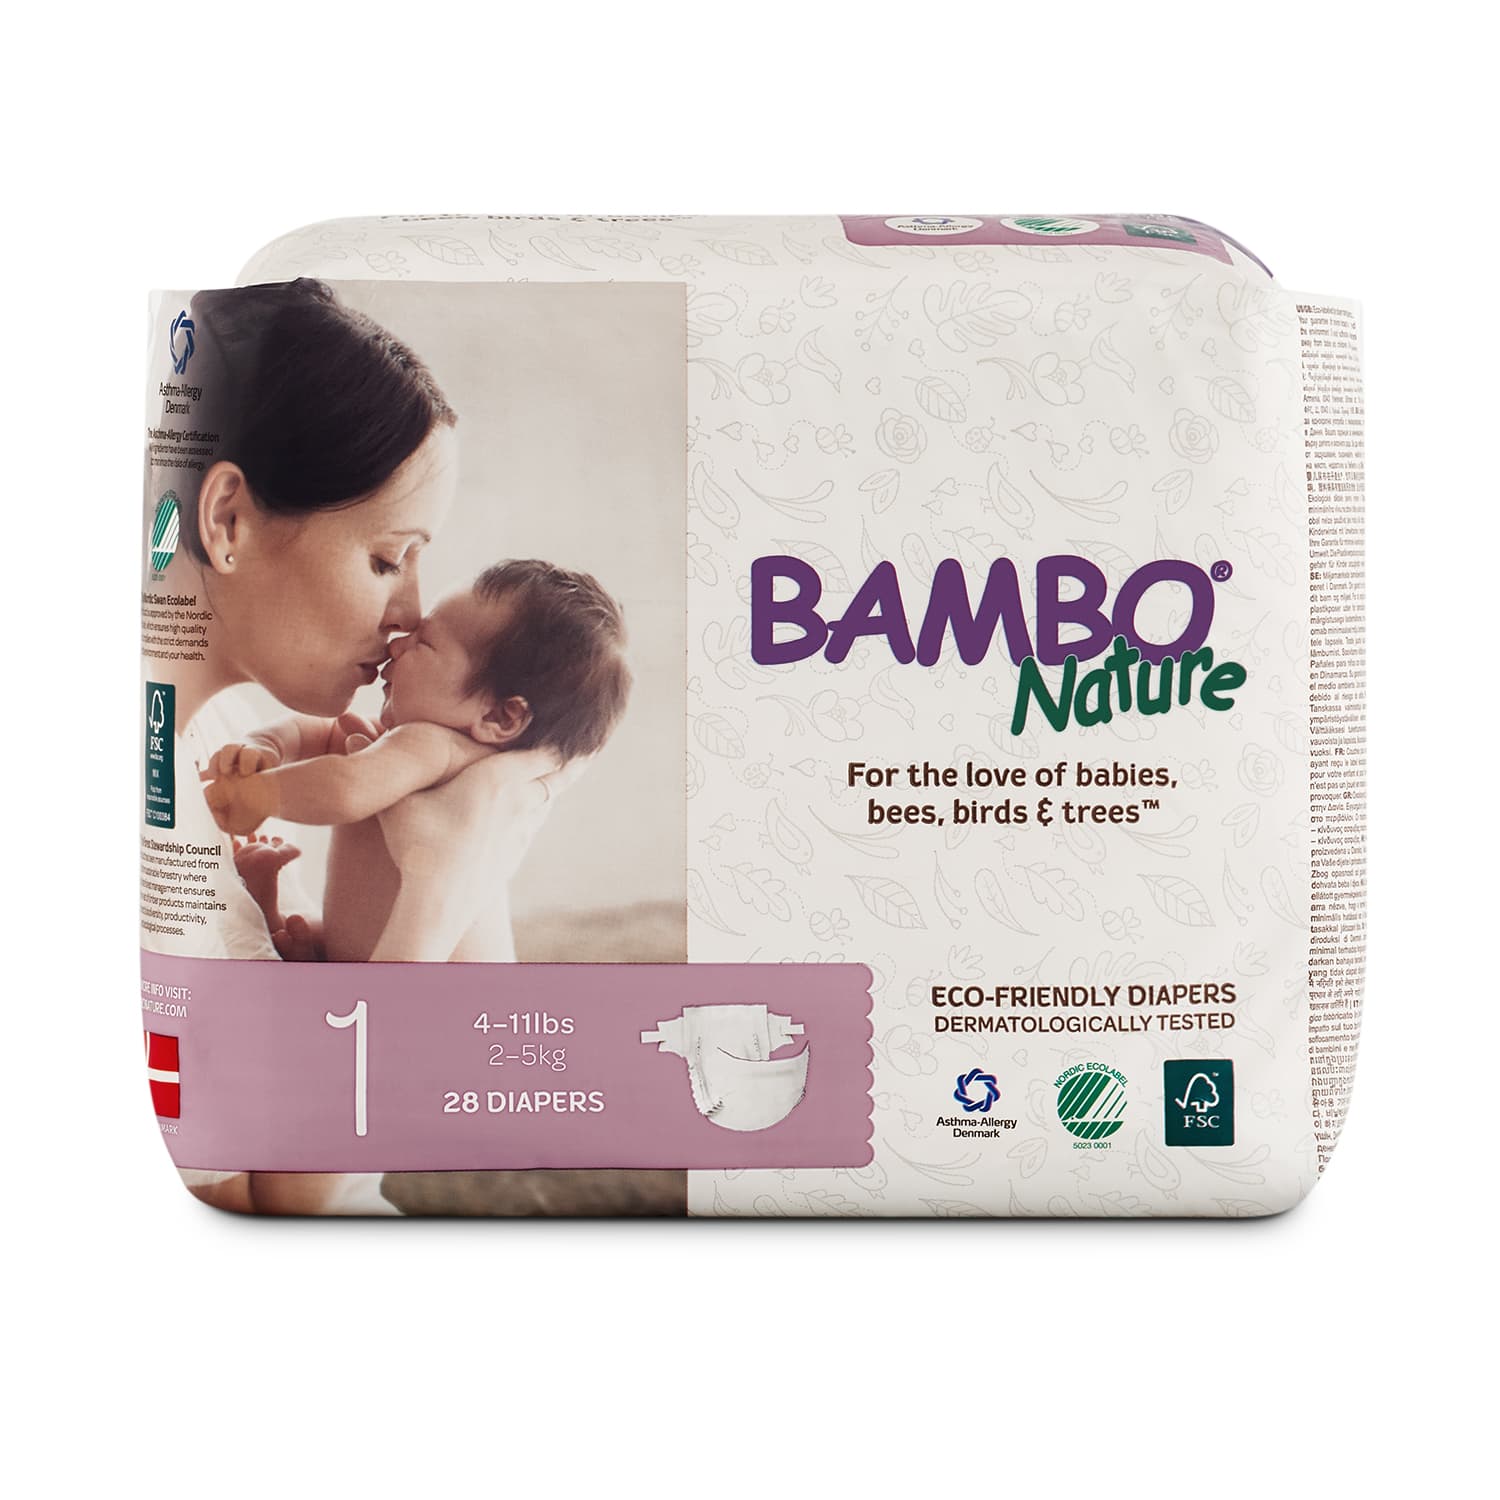 Bambo Nature Diaper Subscription | Gimme the Good Stuff